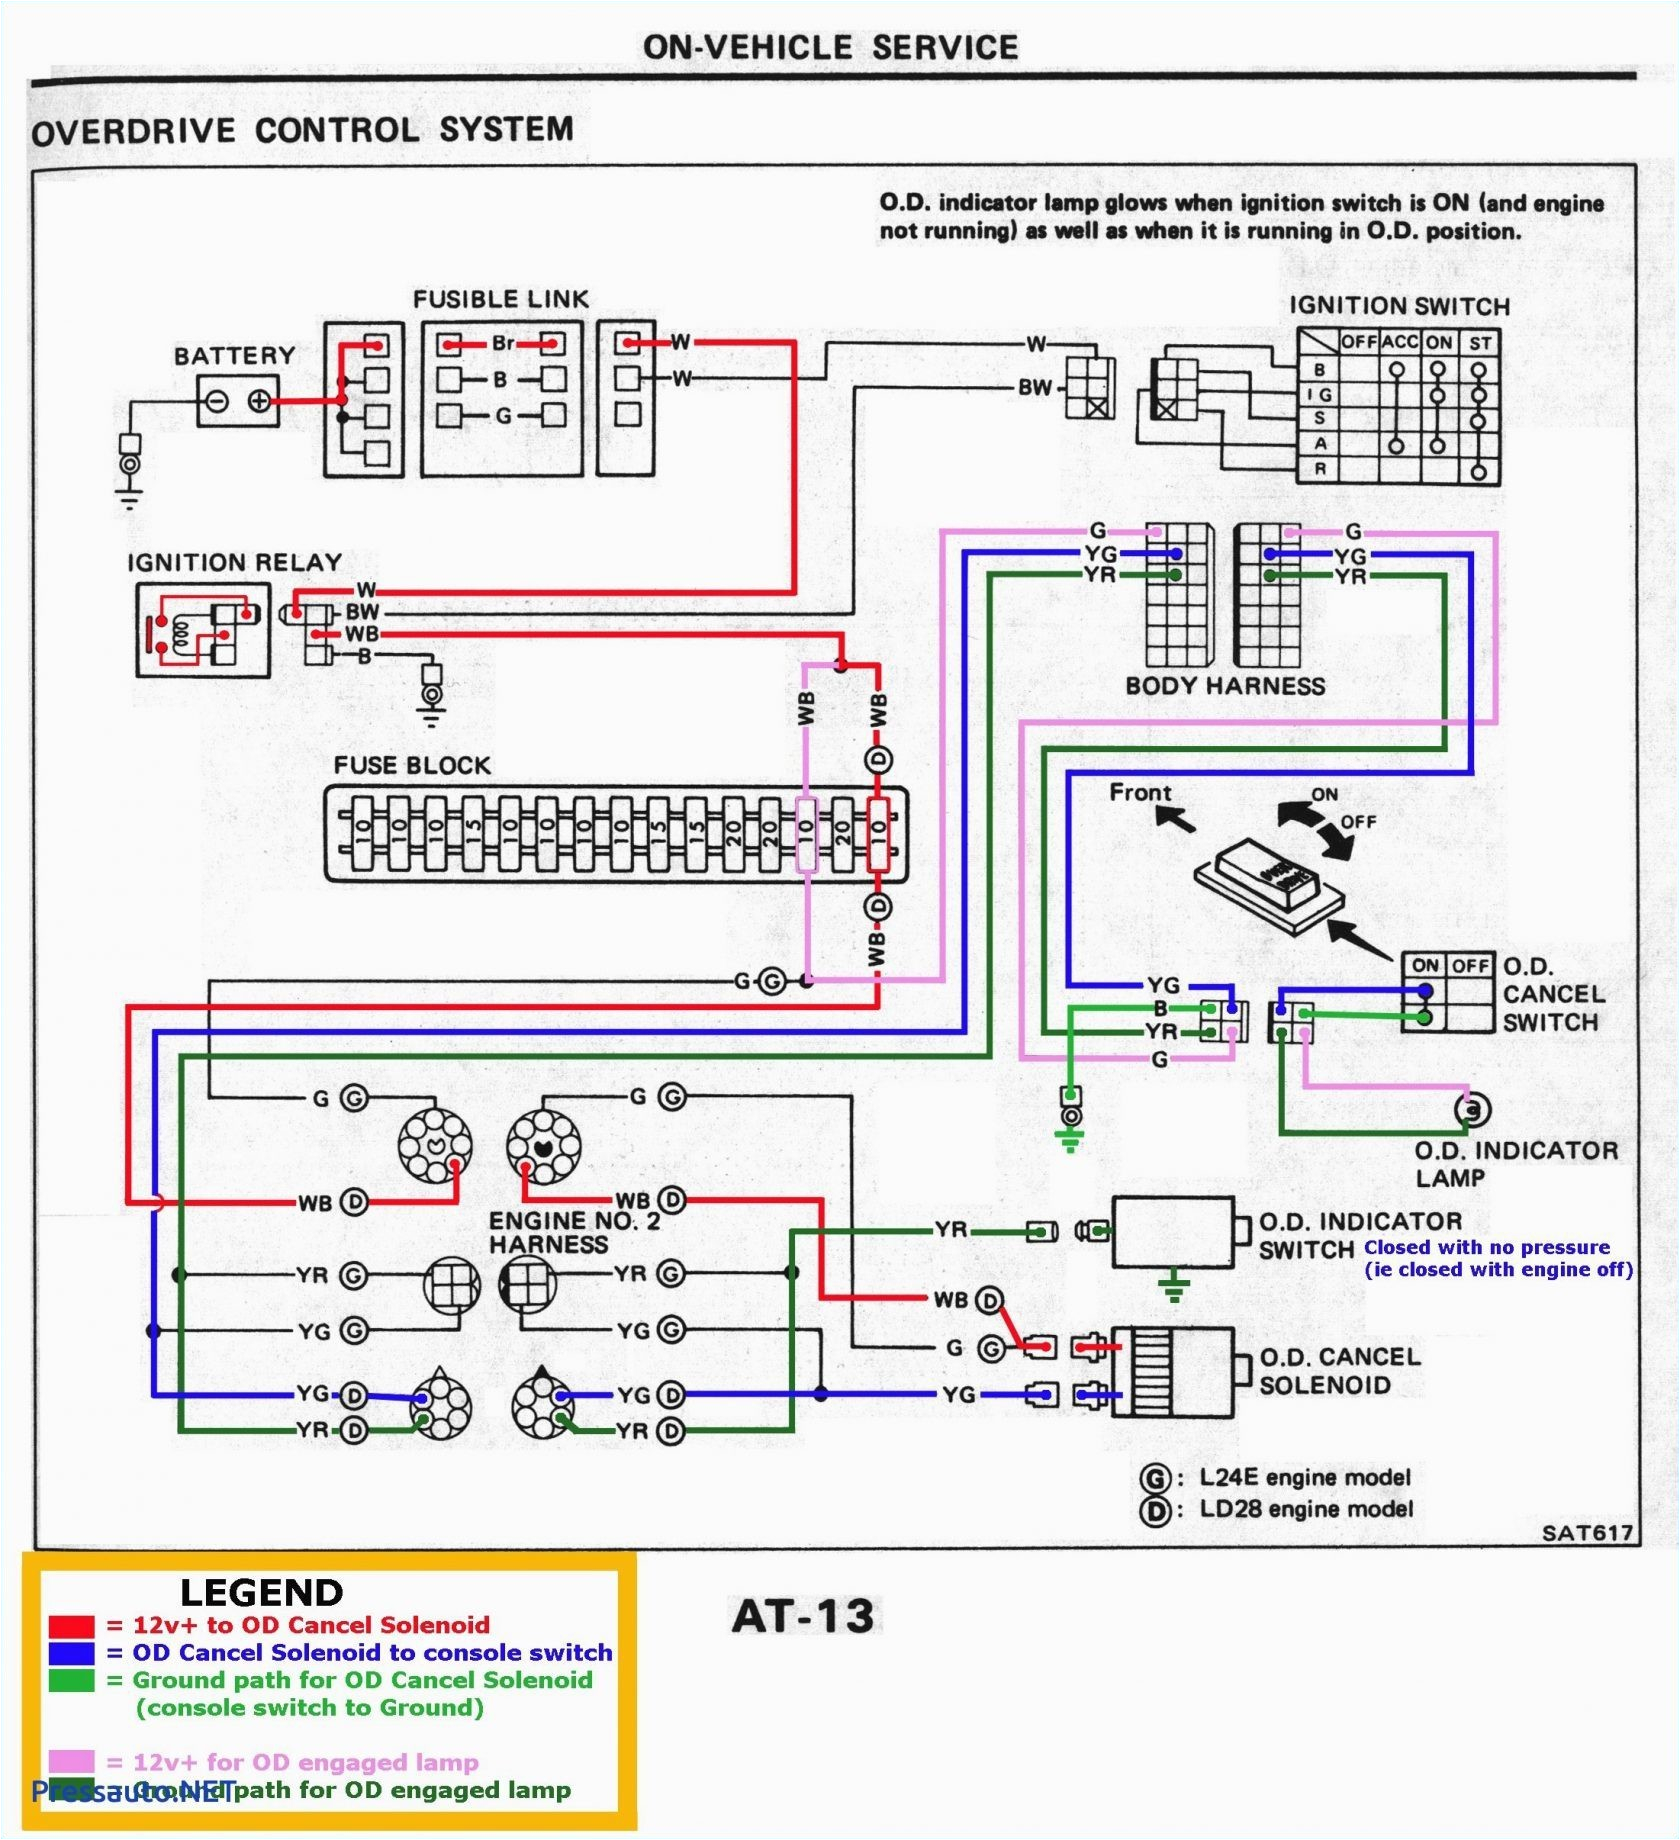 nissan cd player wiring diagram wiring diagram wiring likewise ford stereo cd player on fusion head unit wiring